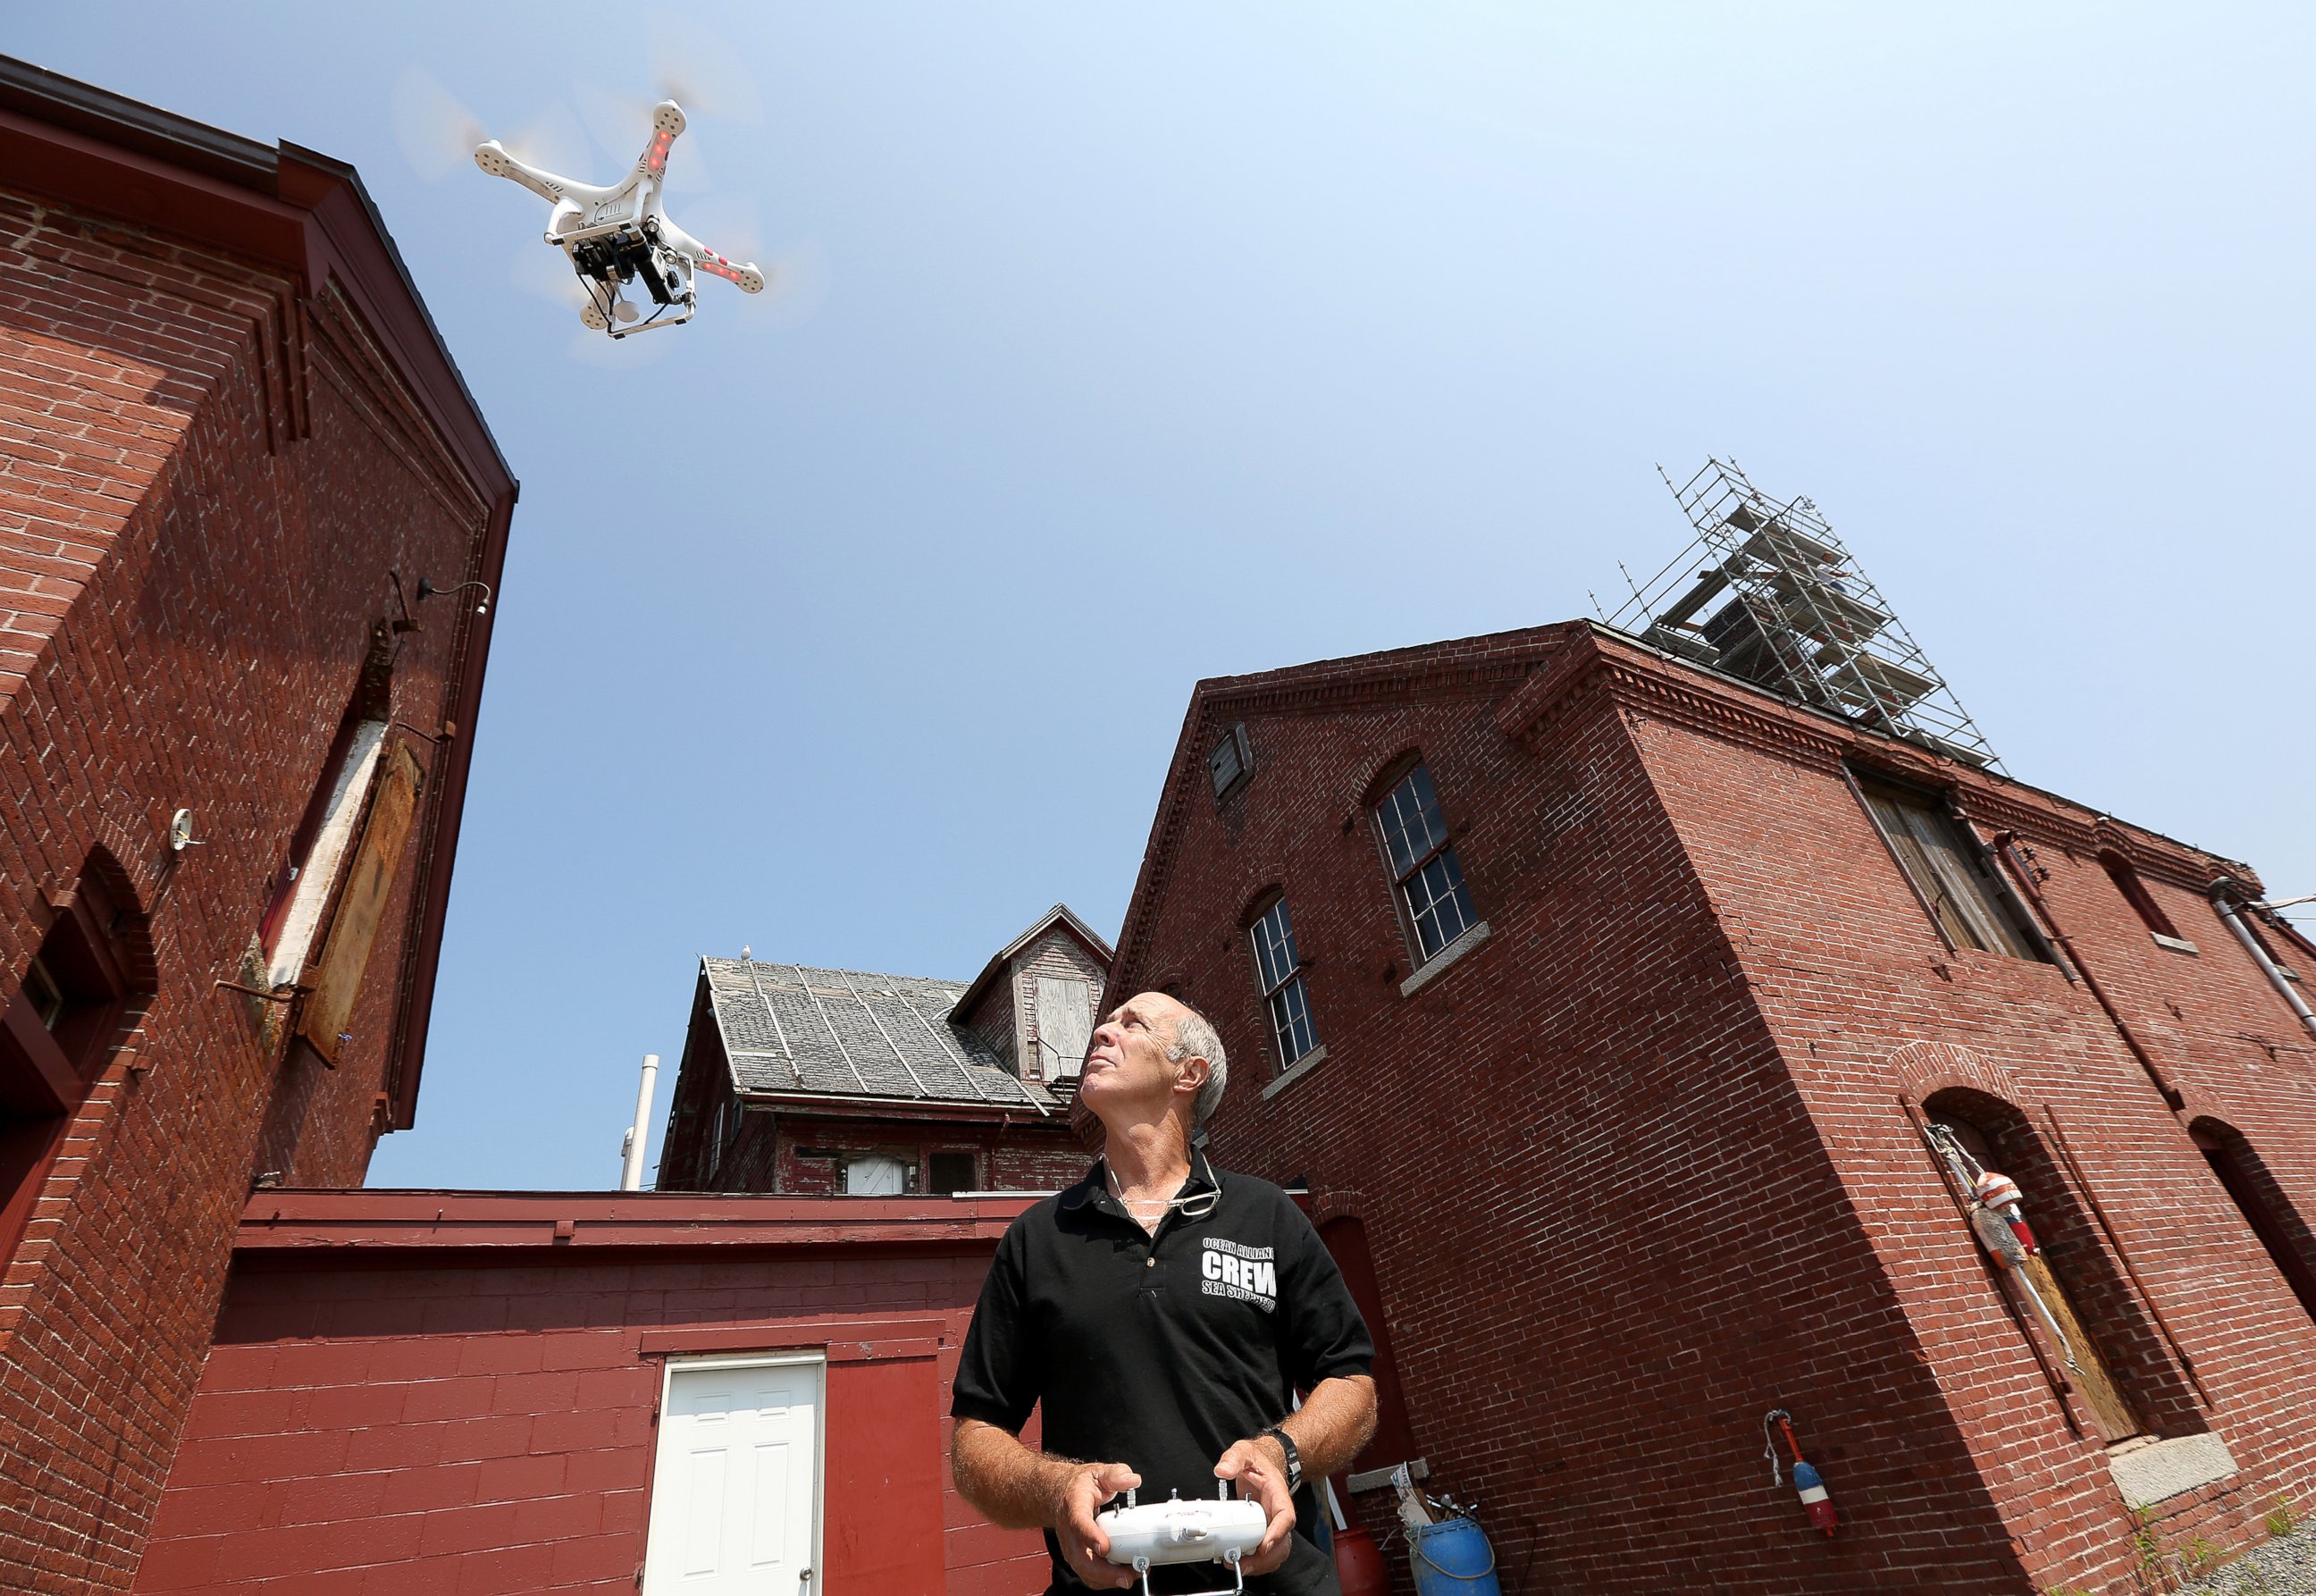 PHOTO: Lain Kerr, CEO of Ocean Alliance, demonstrates the use of a DJI-drone on July 23, 2014. Ocean Alliance uses drones as research tools to collect information on whales and the ocean environment.